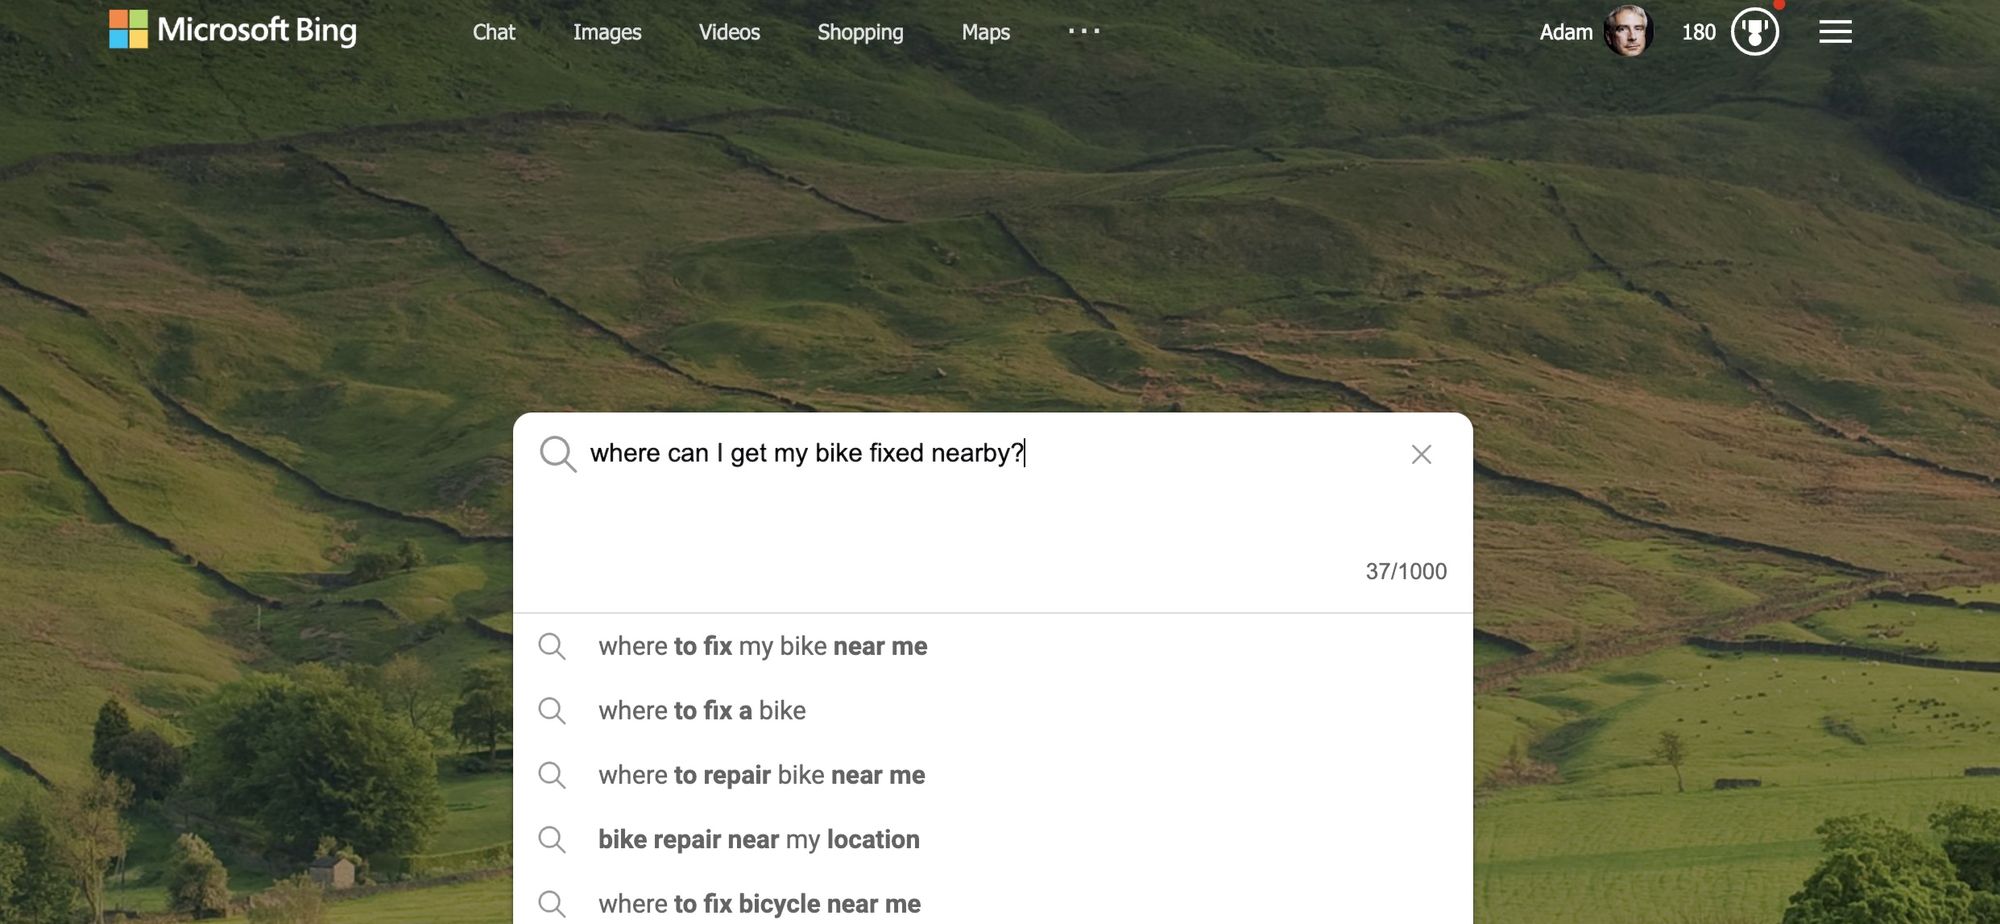 A Bing search for bicycle repairs